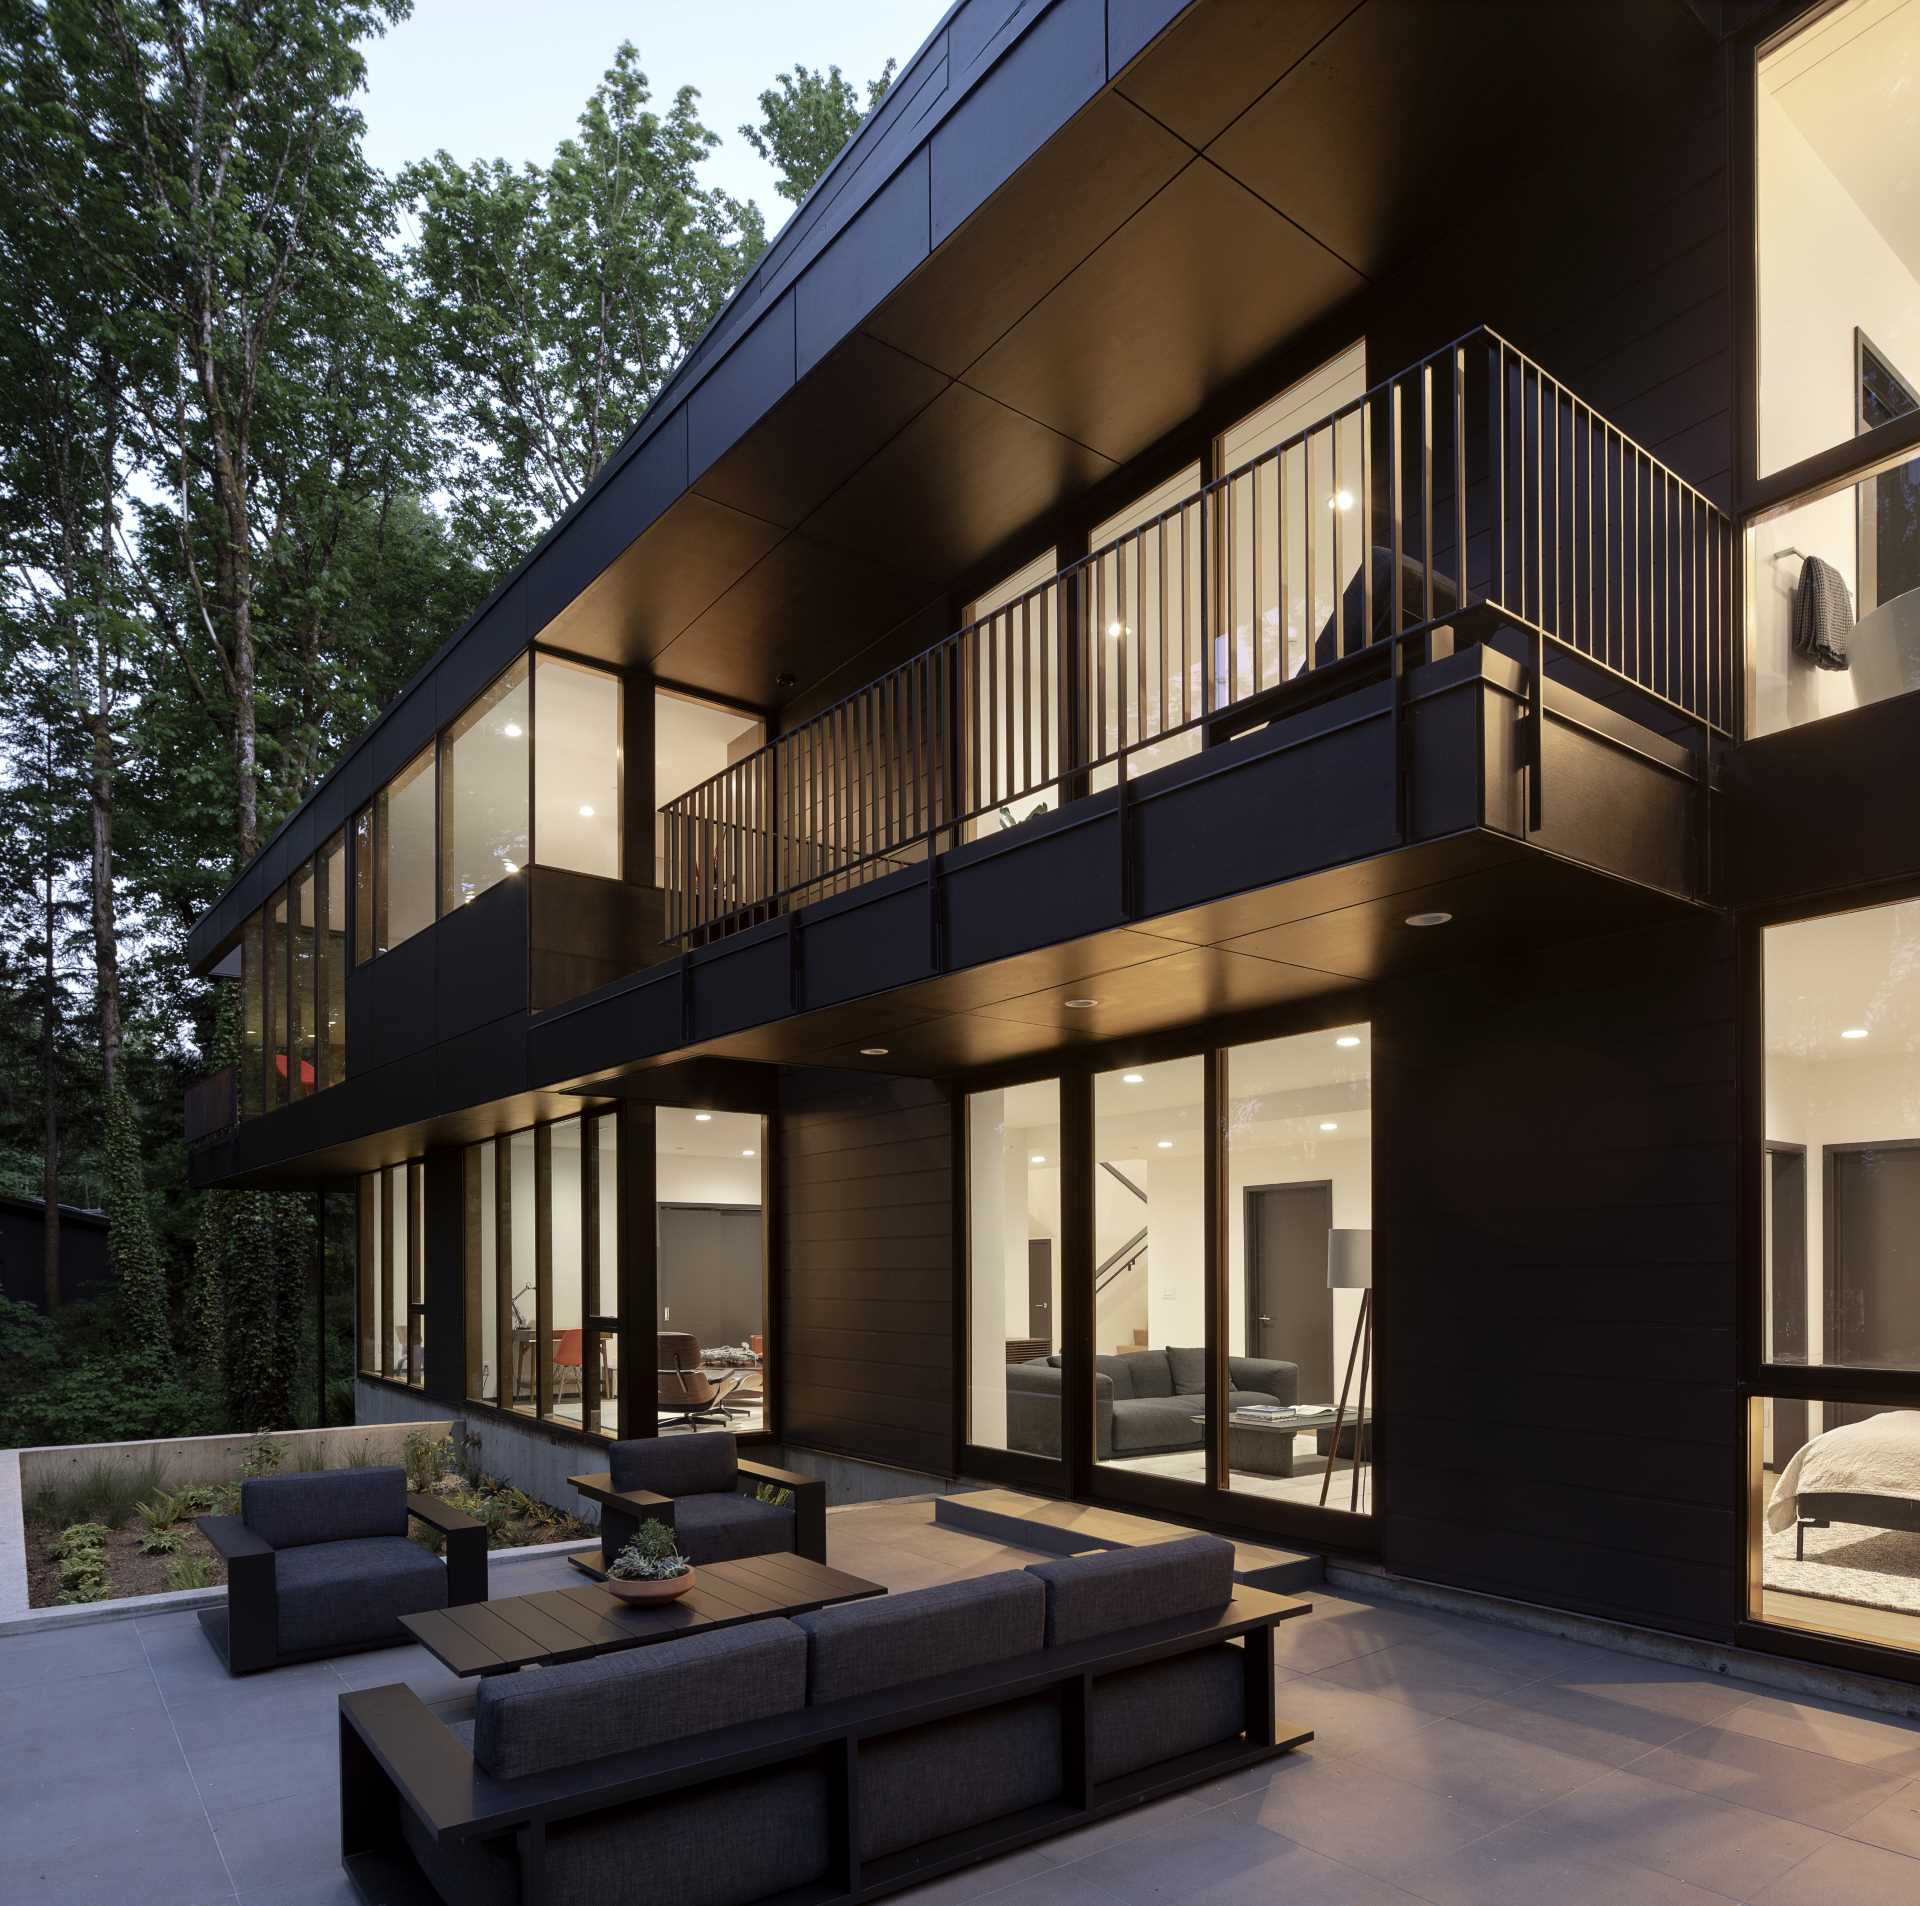 A modern black house with rooms that open to a patio furnished with outdoor furniture, and the forest beyond.